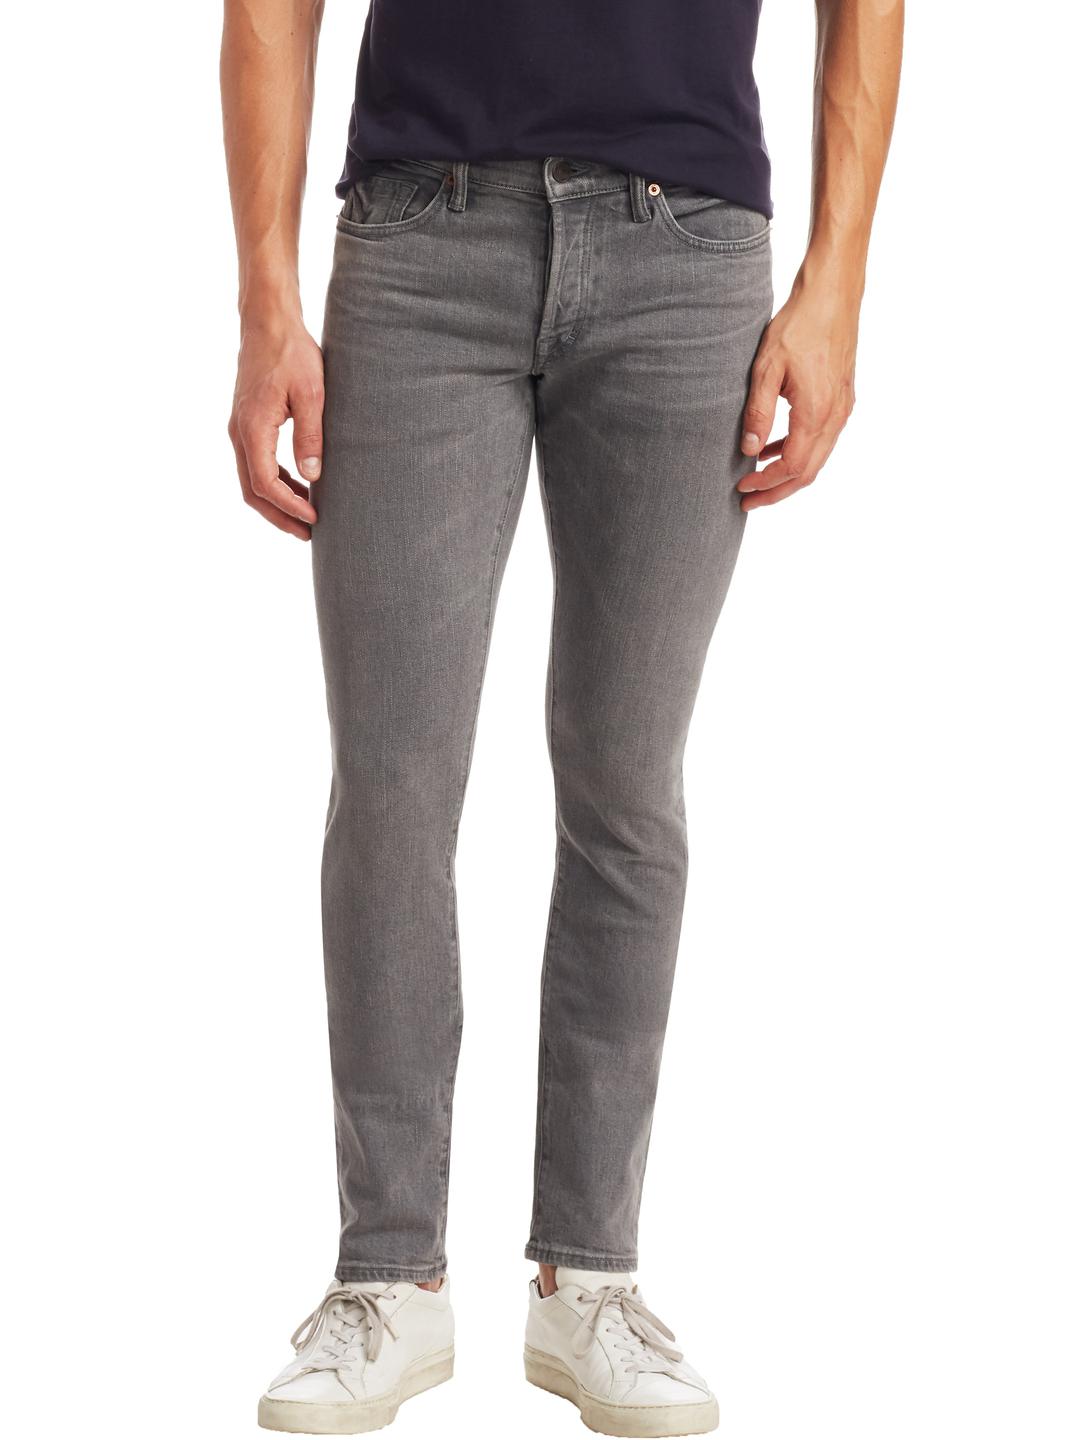 tom ford grey jeans